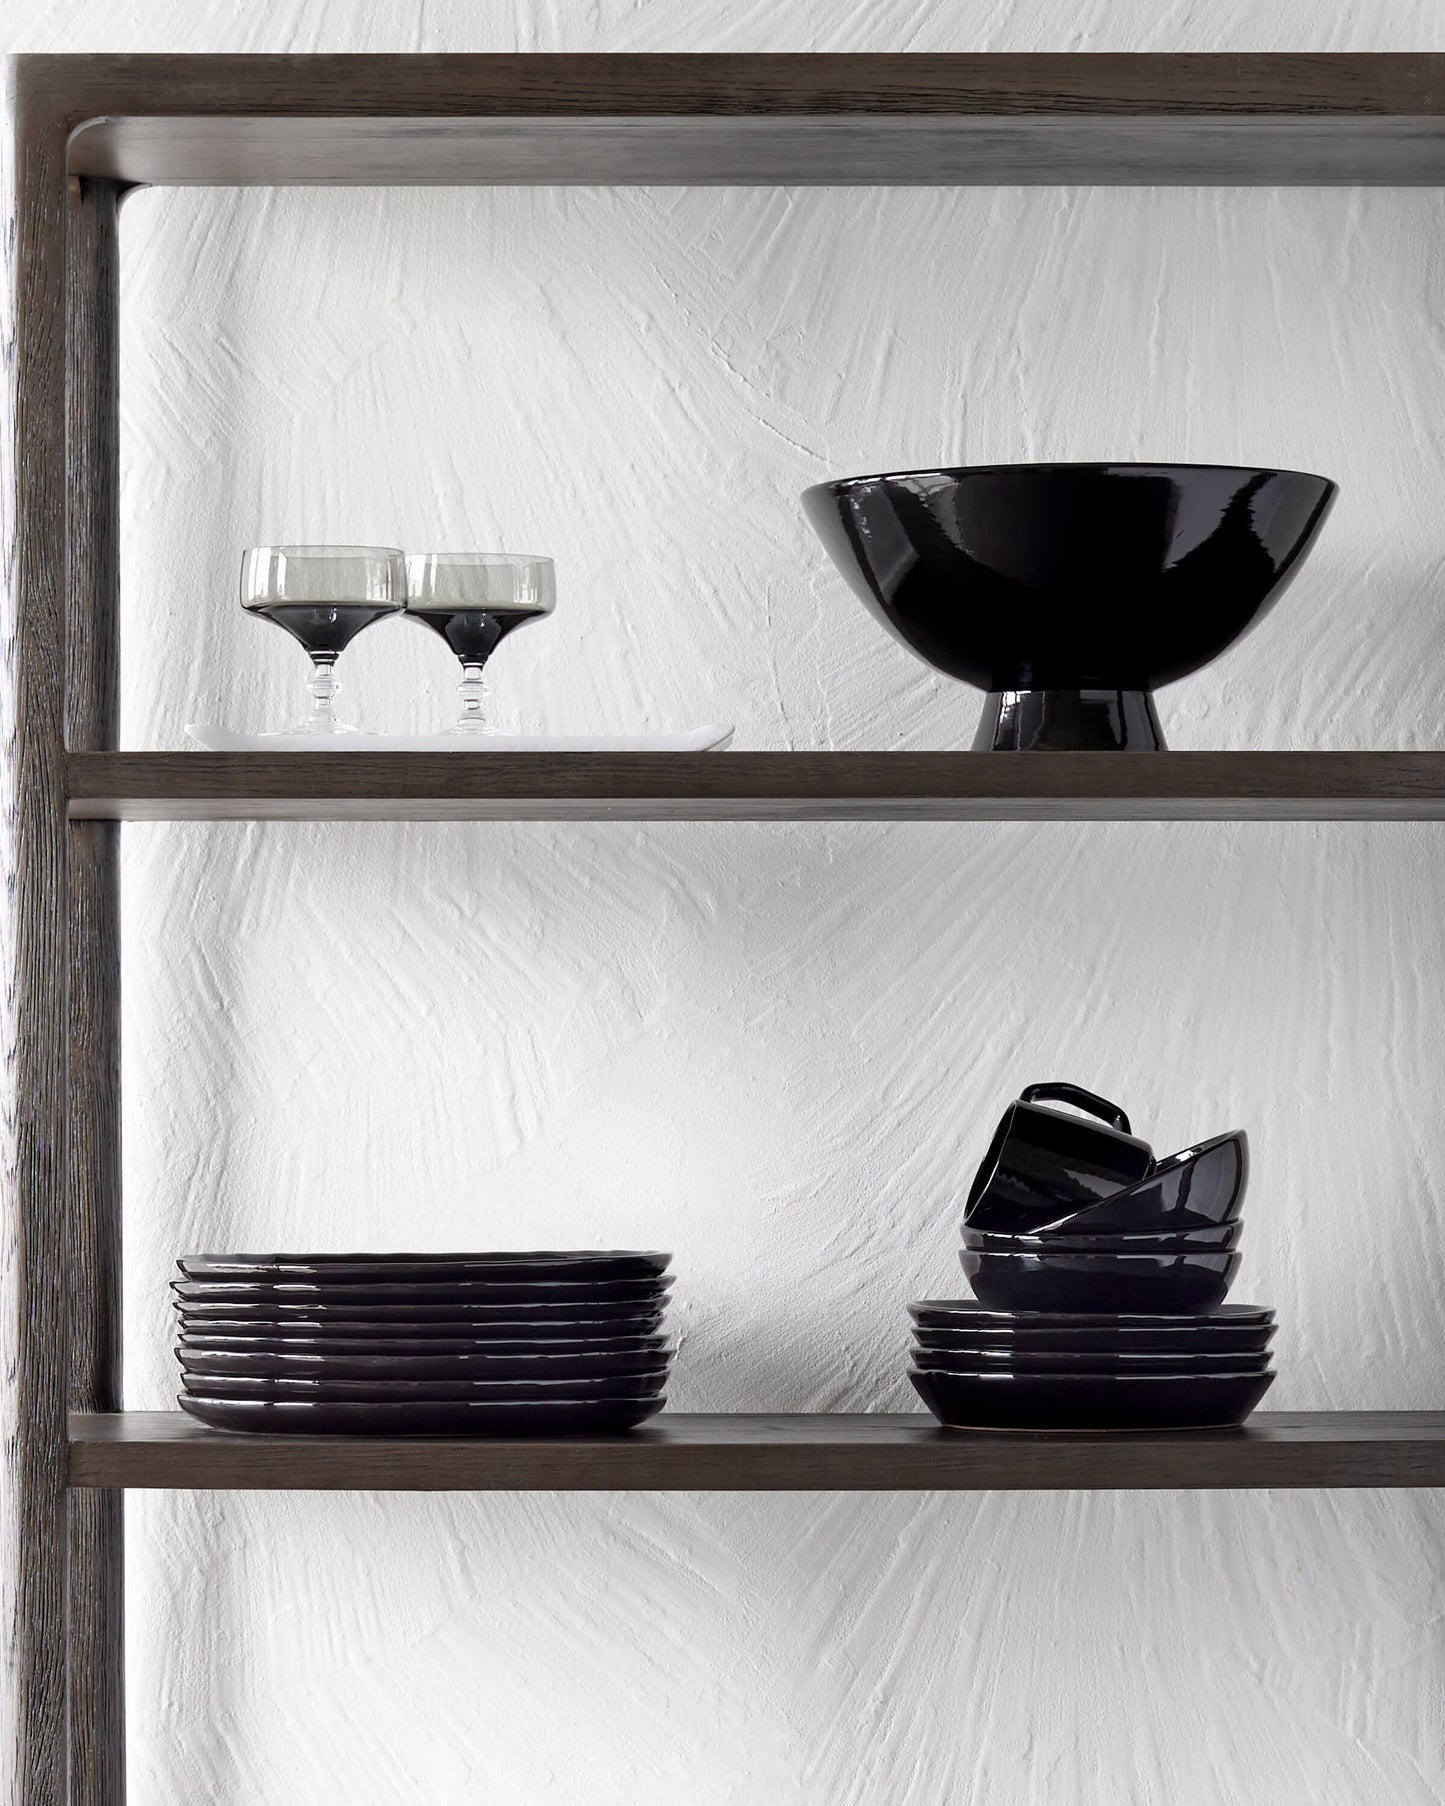 
                  
                    Fairkind Riad Dinnerware and Rami Pedestal Bowl in black stacked on floating kitchen shelves.
                  
                